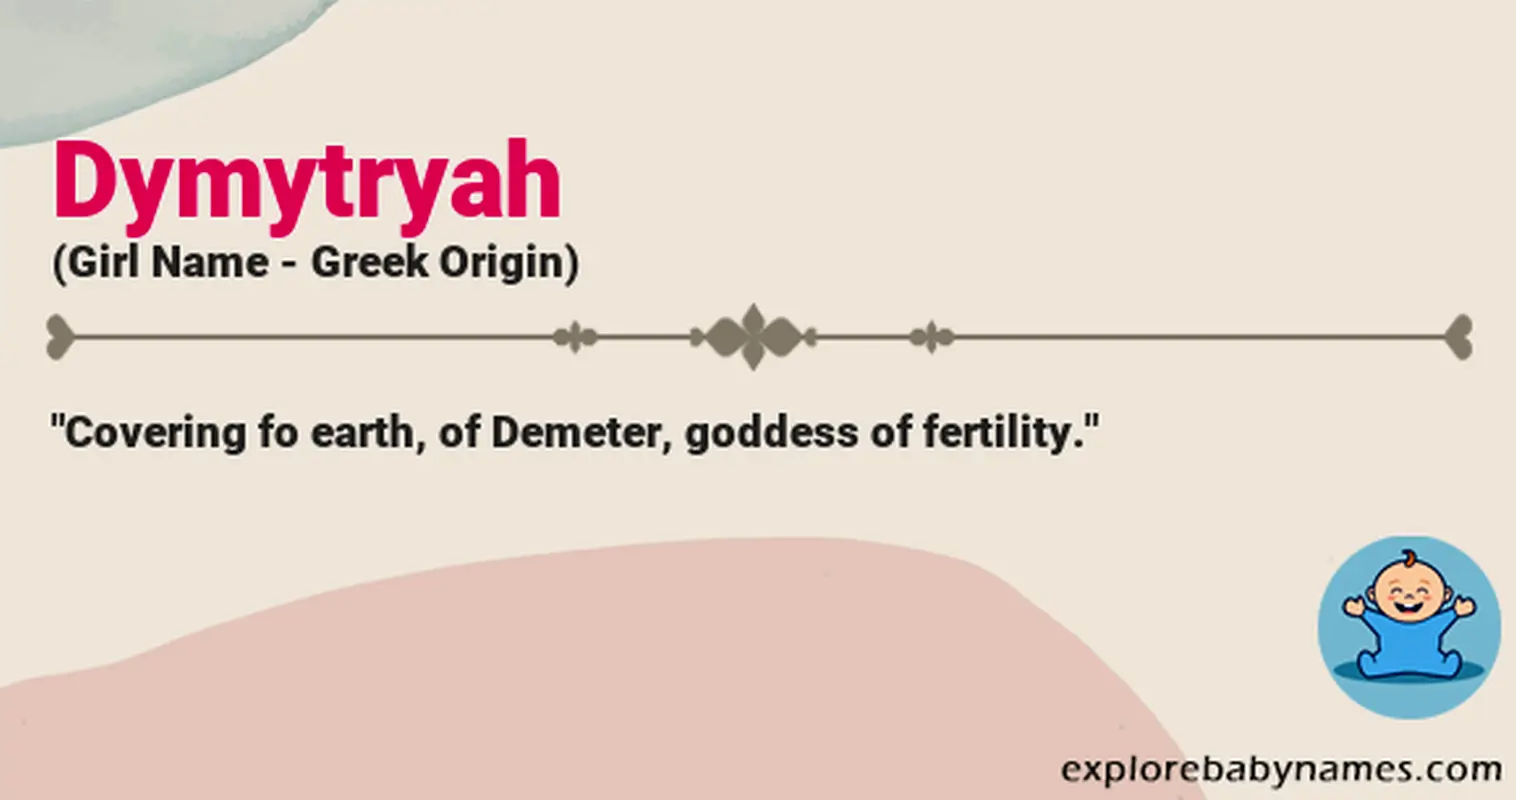 Meaning of Dymytryah